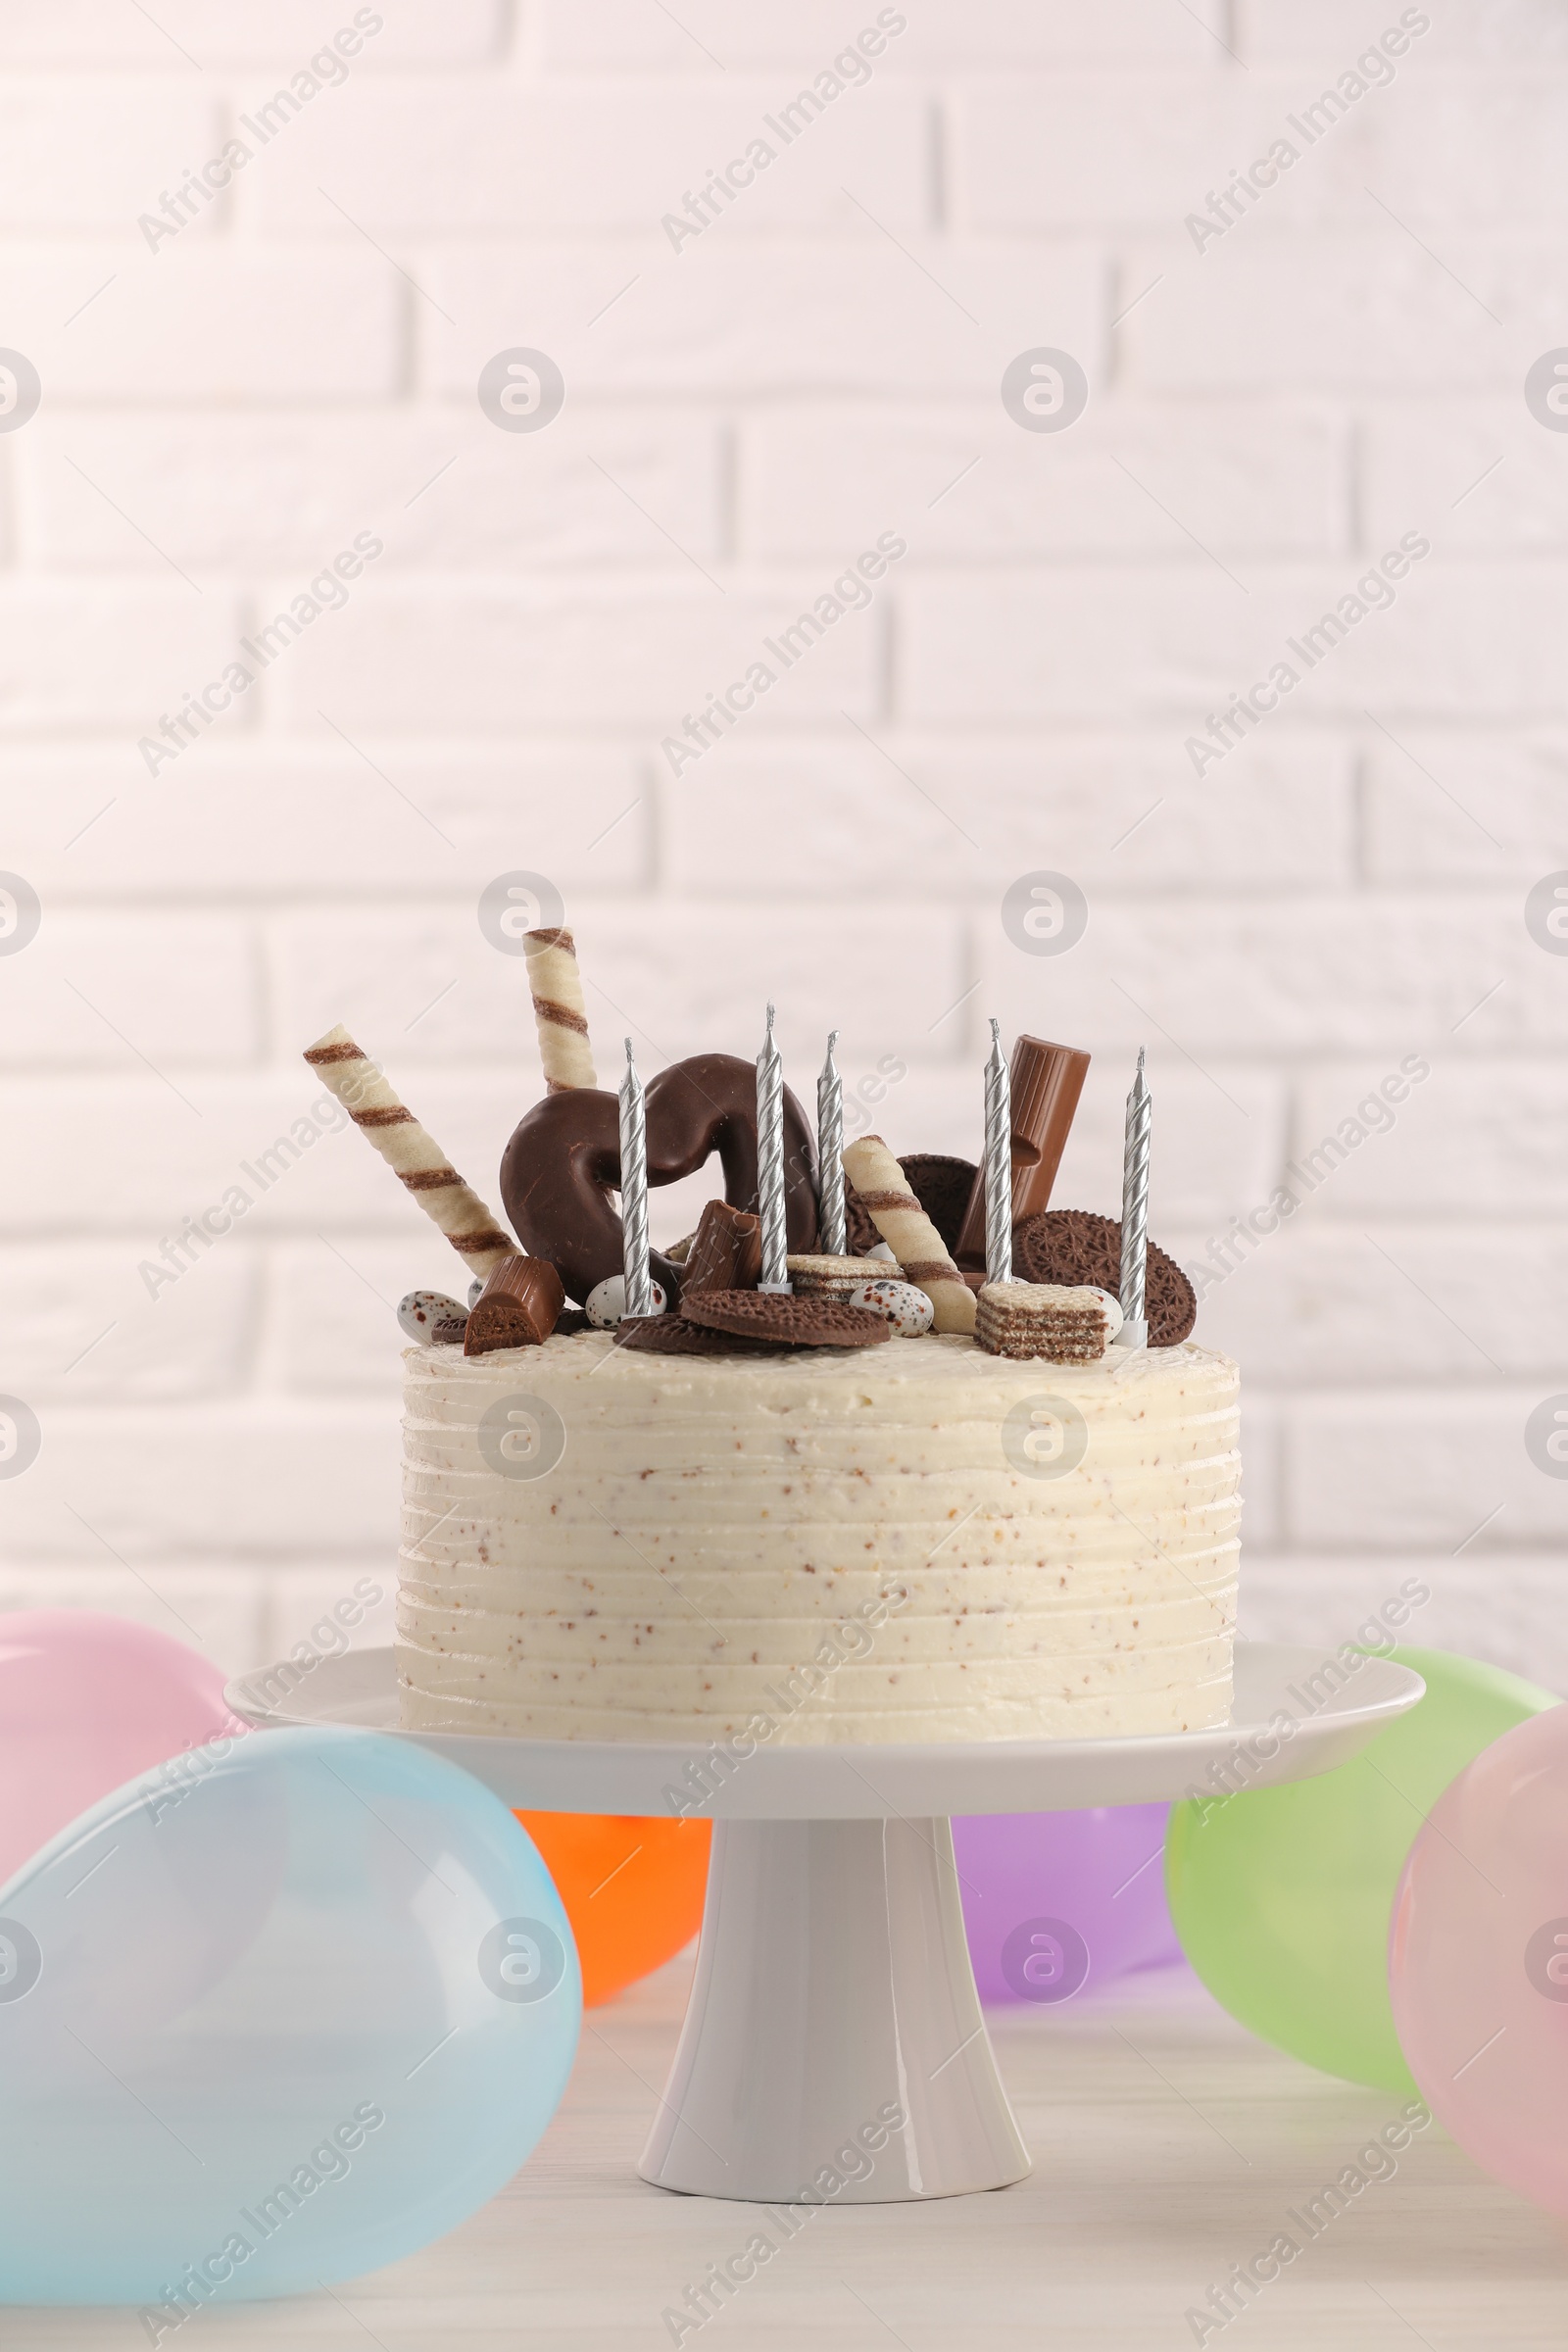 Photo of Delicious cake decorated with sweets and candles among balloons on white table